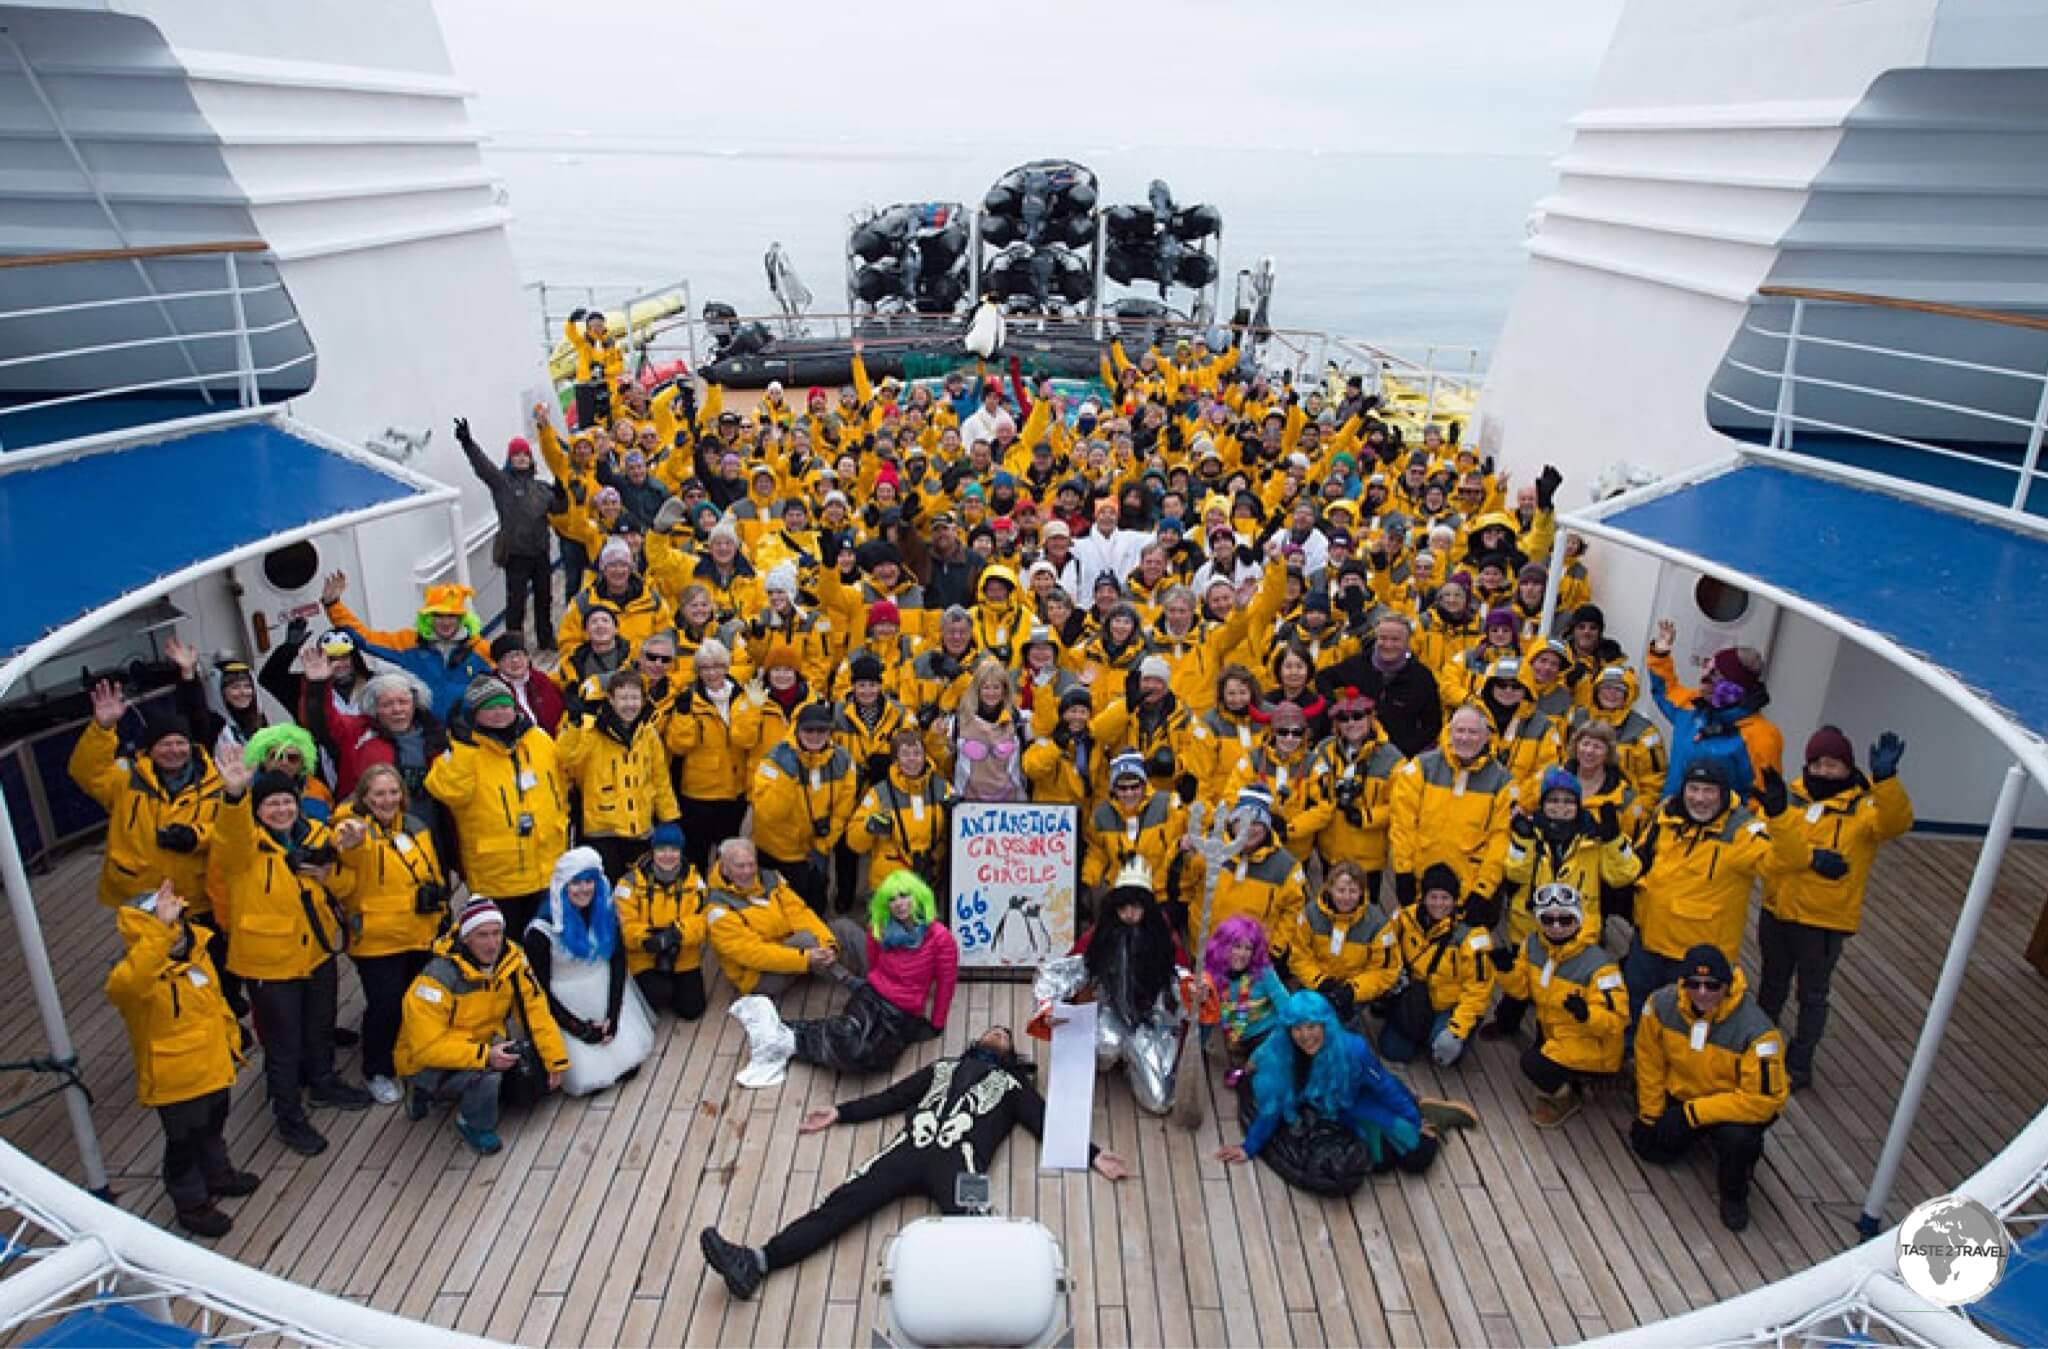 A group photo, taken at the Antarctic Circle, one of the major goals on our <i>Crossing the Circle</i> expedition.